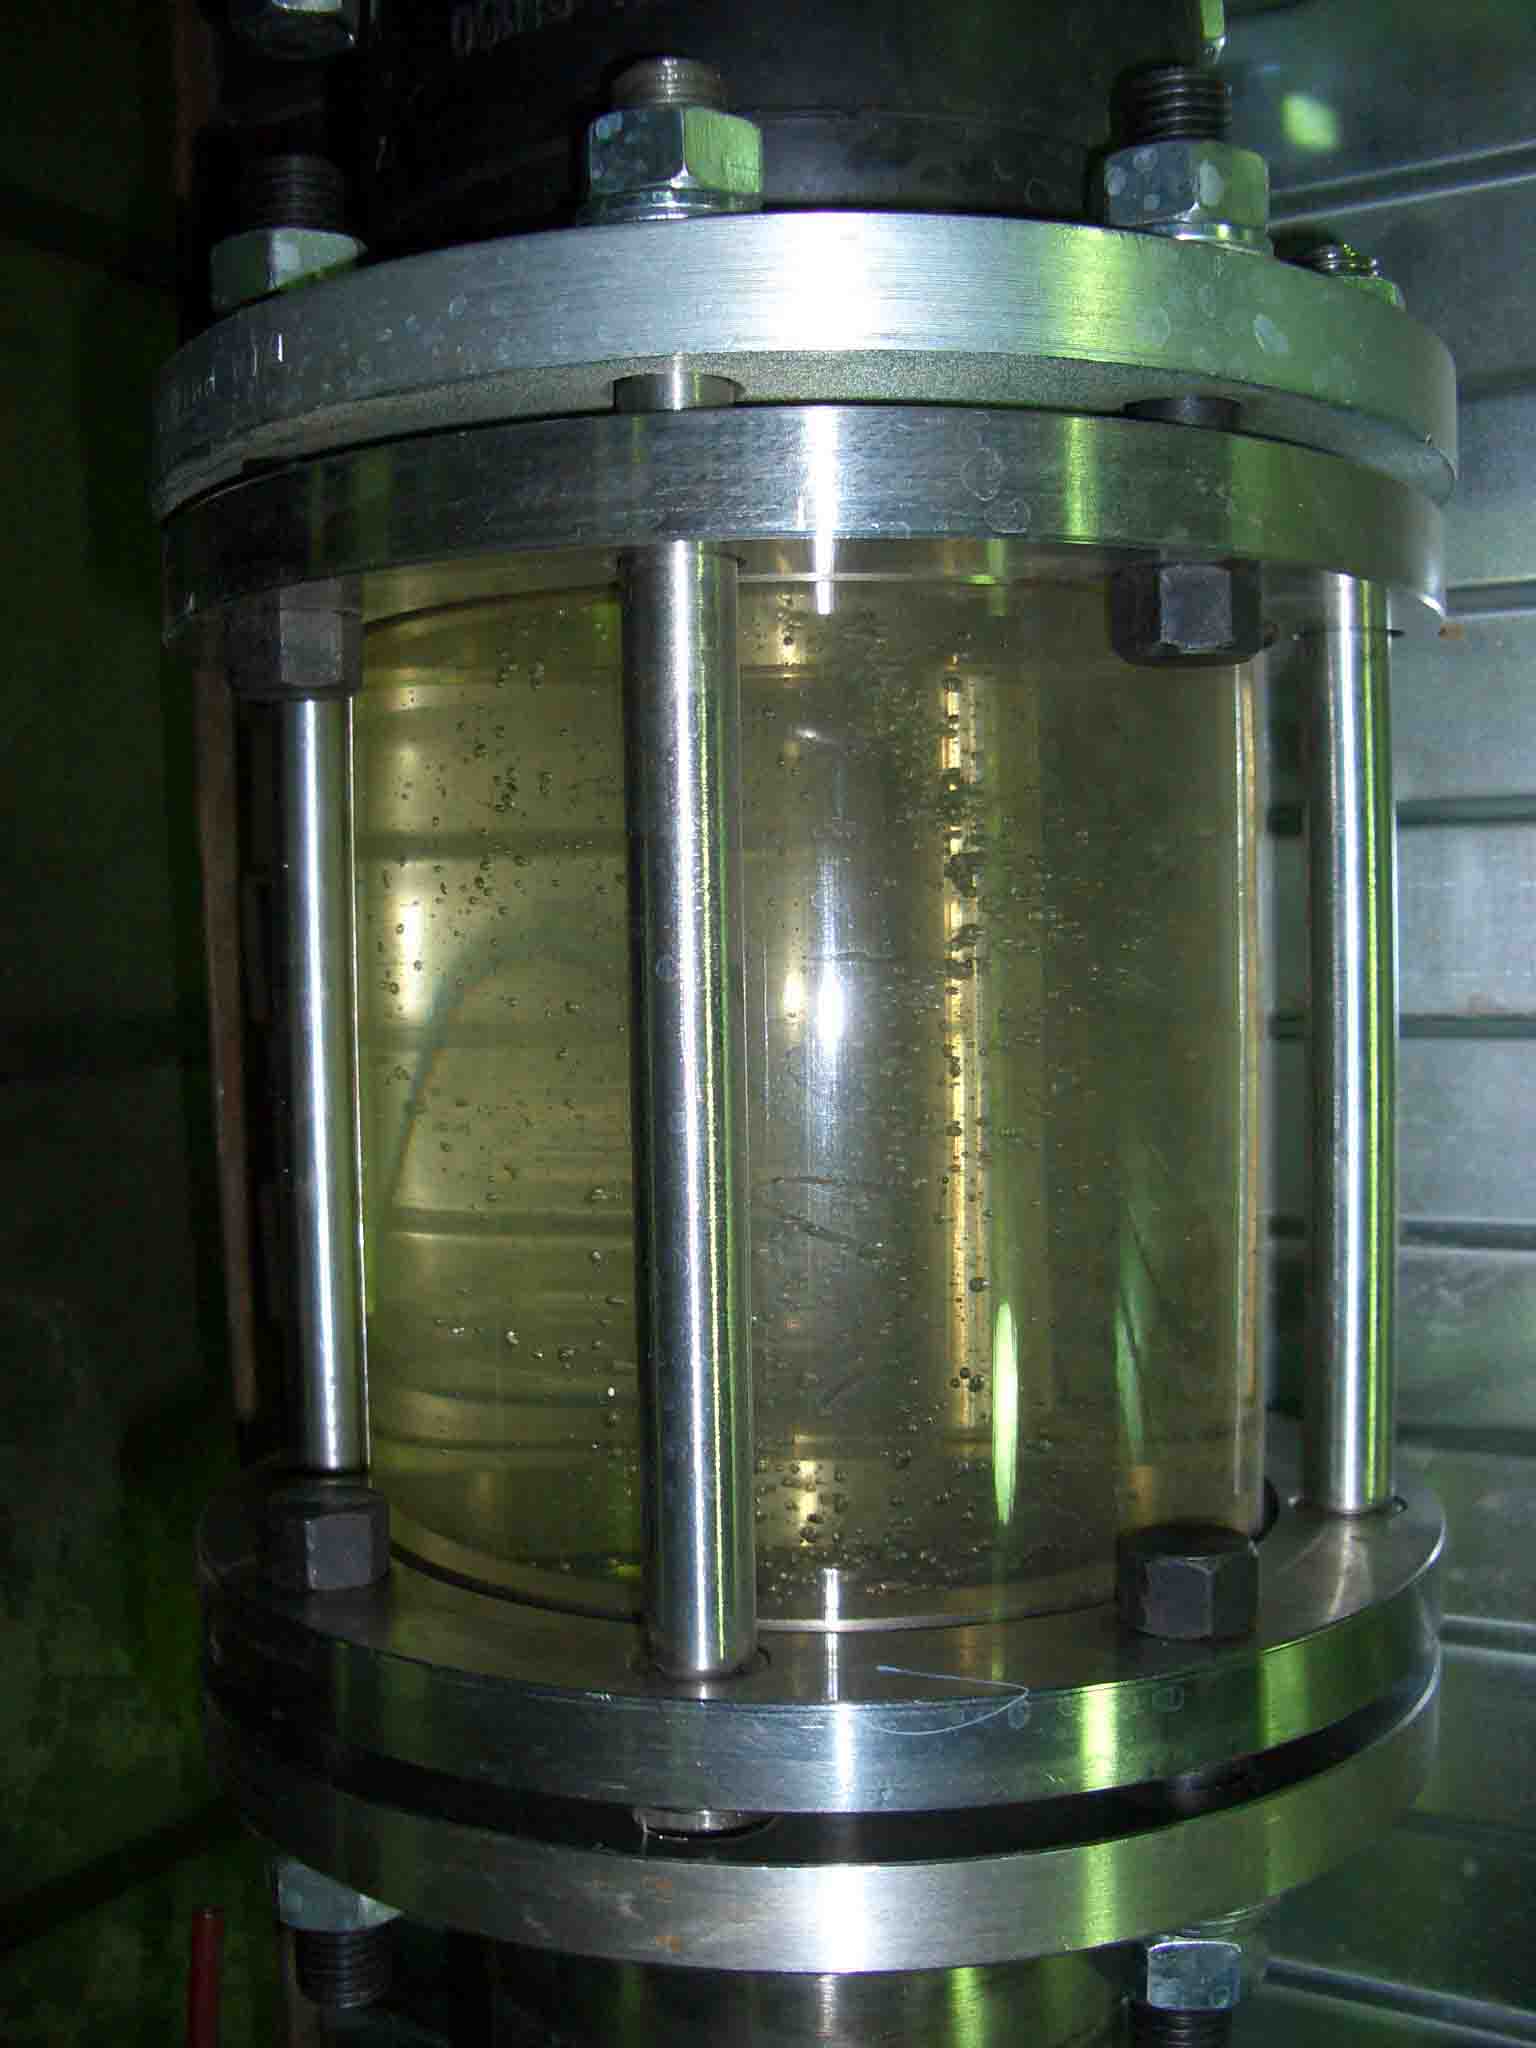 Scientific equipment for calibration and testing of volumetric and mass flowmeters, Standards measurement of liquid flow in petrochemical and chemical industry, Direct mass flow measuring systems for quantities of liquids, Automated calibration test stands of volumetric and mass flowmeters, Metrological devices for calibration and verification of flowmeters, Test and measurement equipment of flow meters, Flow meters calibration stands, standard fluid flow measurement, flow measuring, calibration flowmeter, verification flow meter, testing flow meter, multiphase, mass flow, thermal mass, IS0 4185, OIML R 105, calibration Micro Motion CMFHC, calibration Promass X, calibration Optimass, calibration Rotamass, reference flow meter, liquid calibration, flow metering, direct mass flow measuring systems, mass flow, volume flow